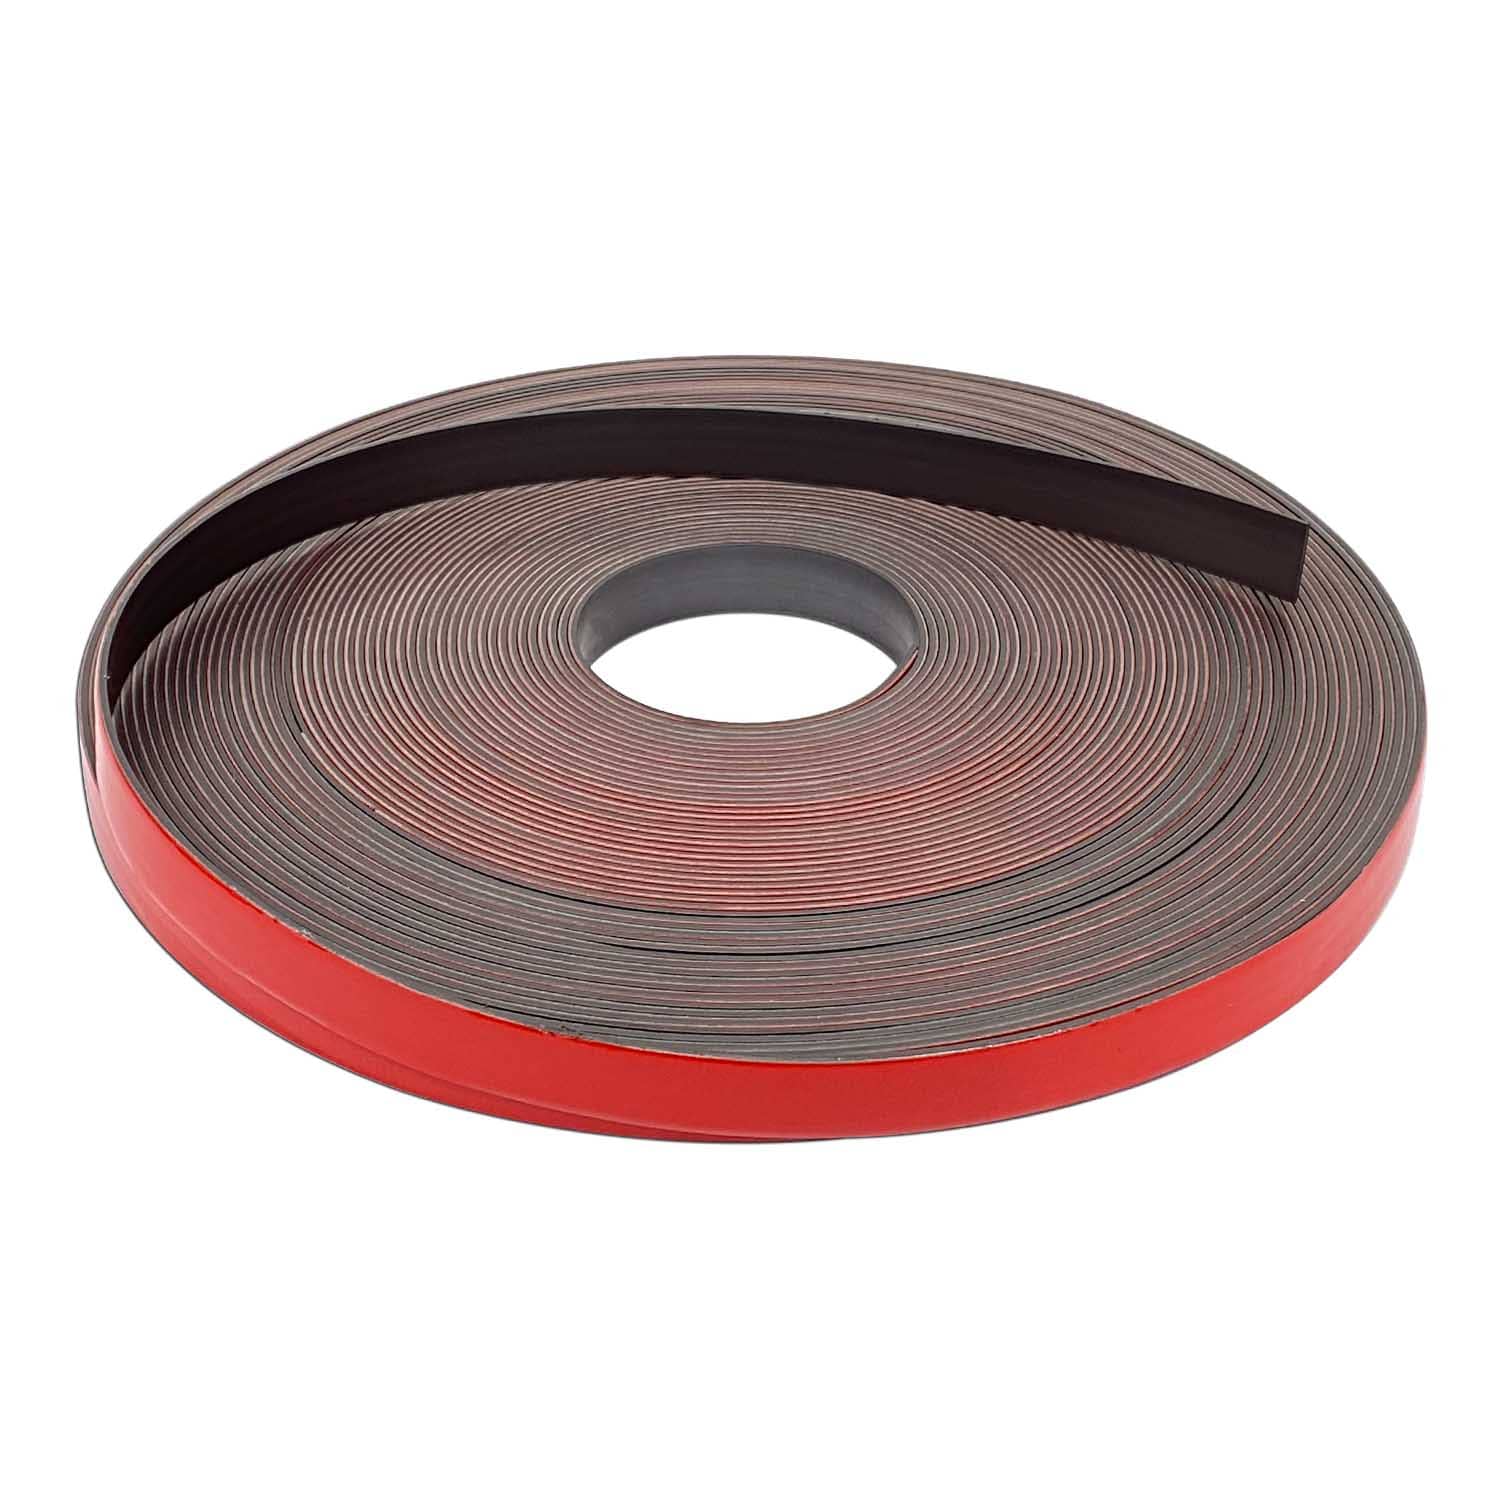 Flexible Magnetic Tape Magnetic Strip With Strong Self - Temu